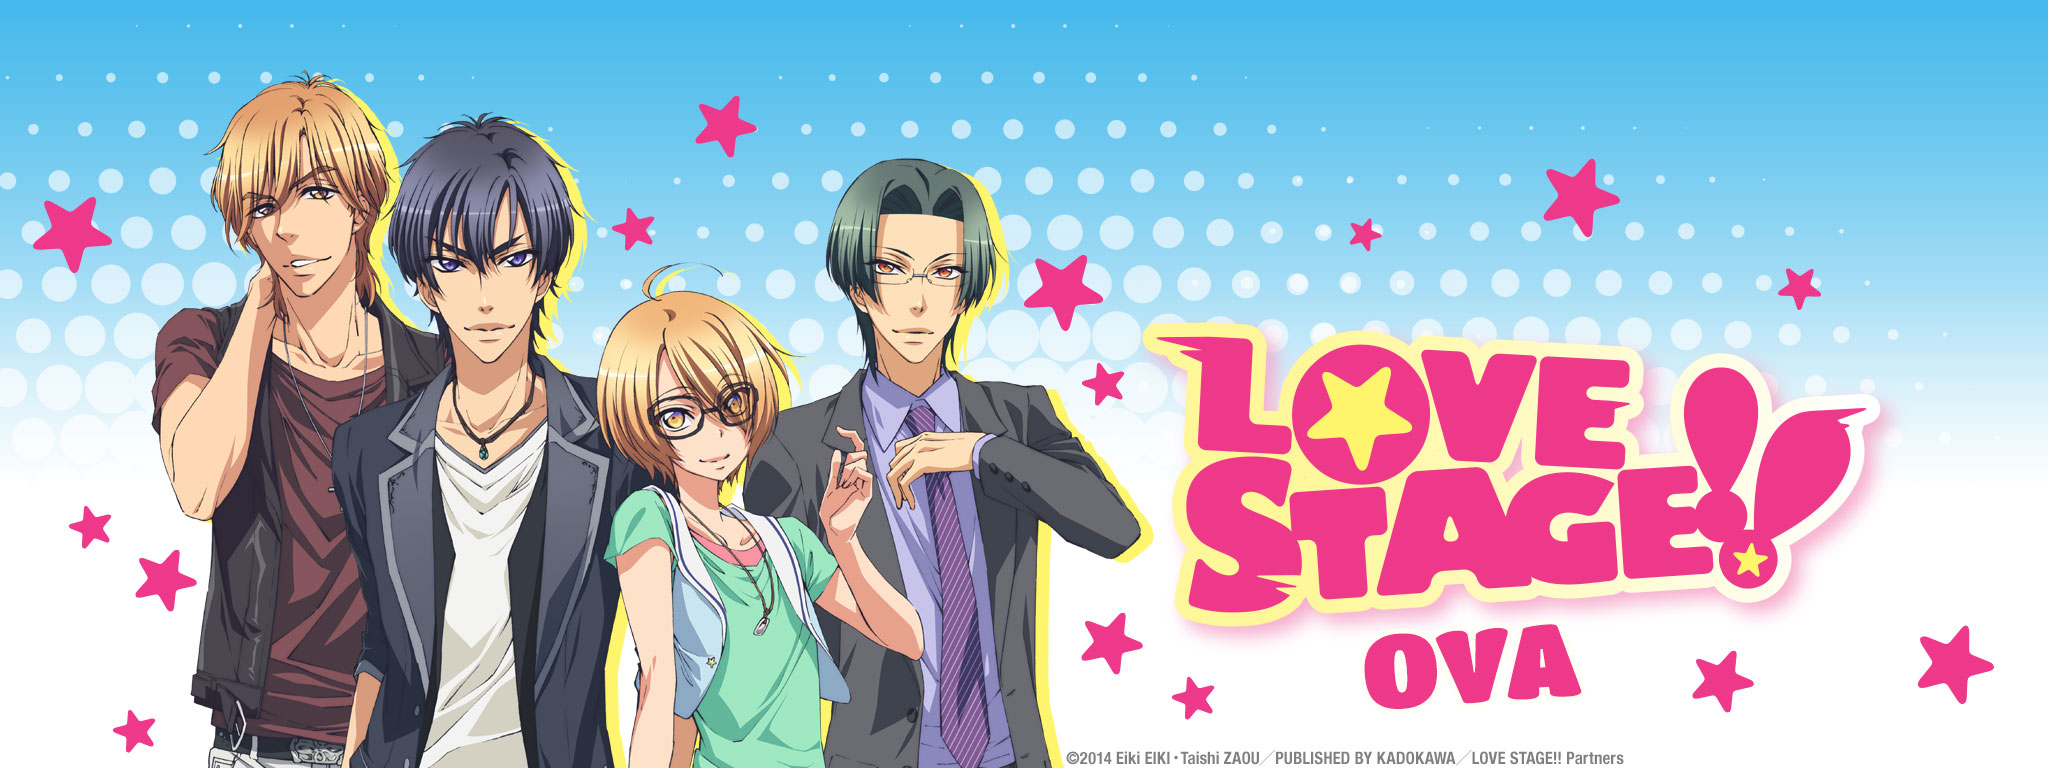 Title Art for Love Stage OVA